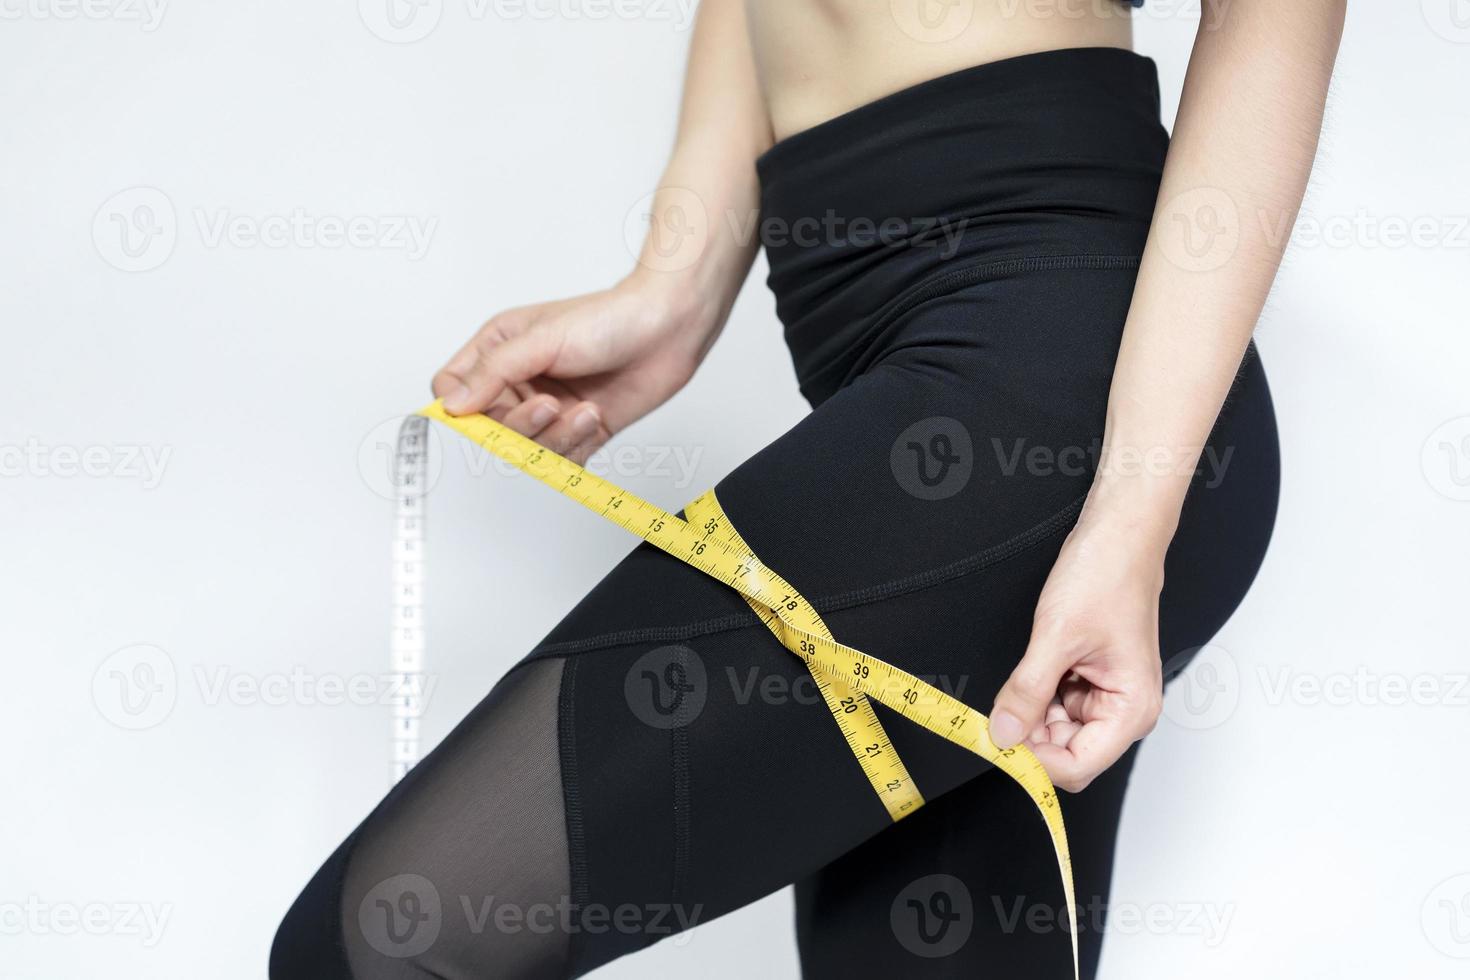 A skinny woman wearing black pants uses a tape measure around her thigh against with gray background. Health care concept. photo